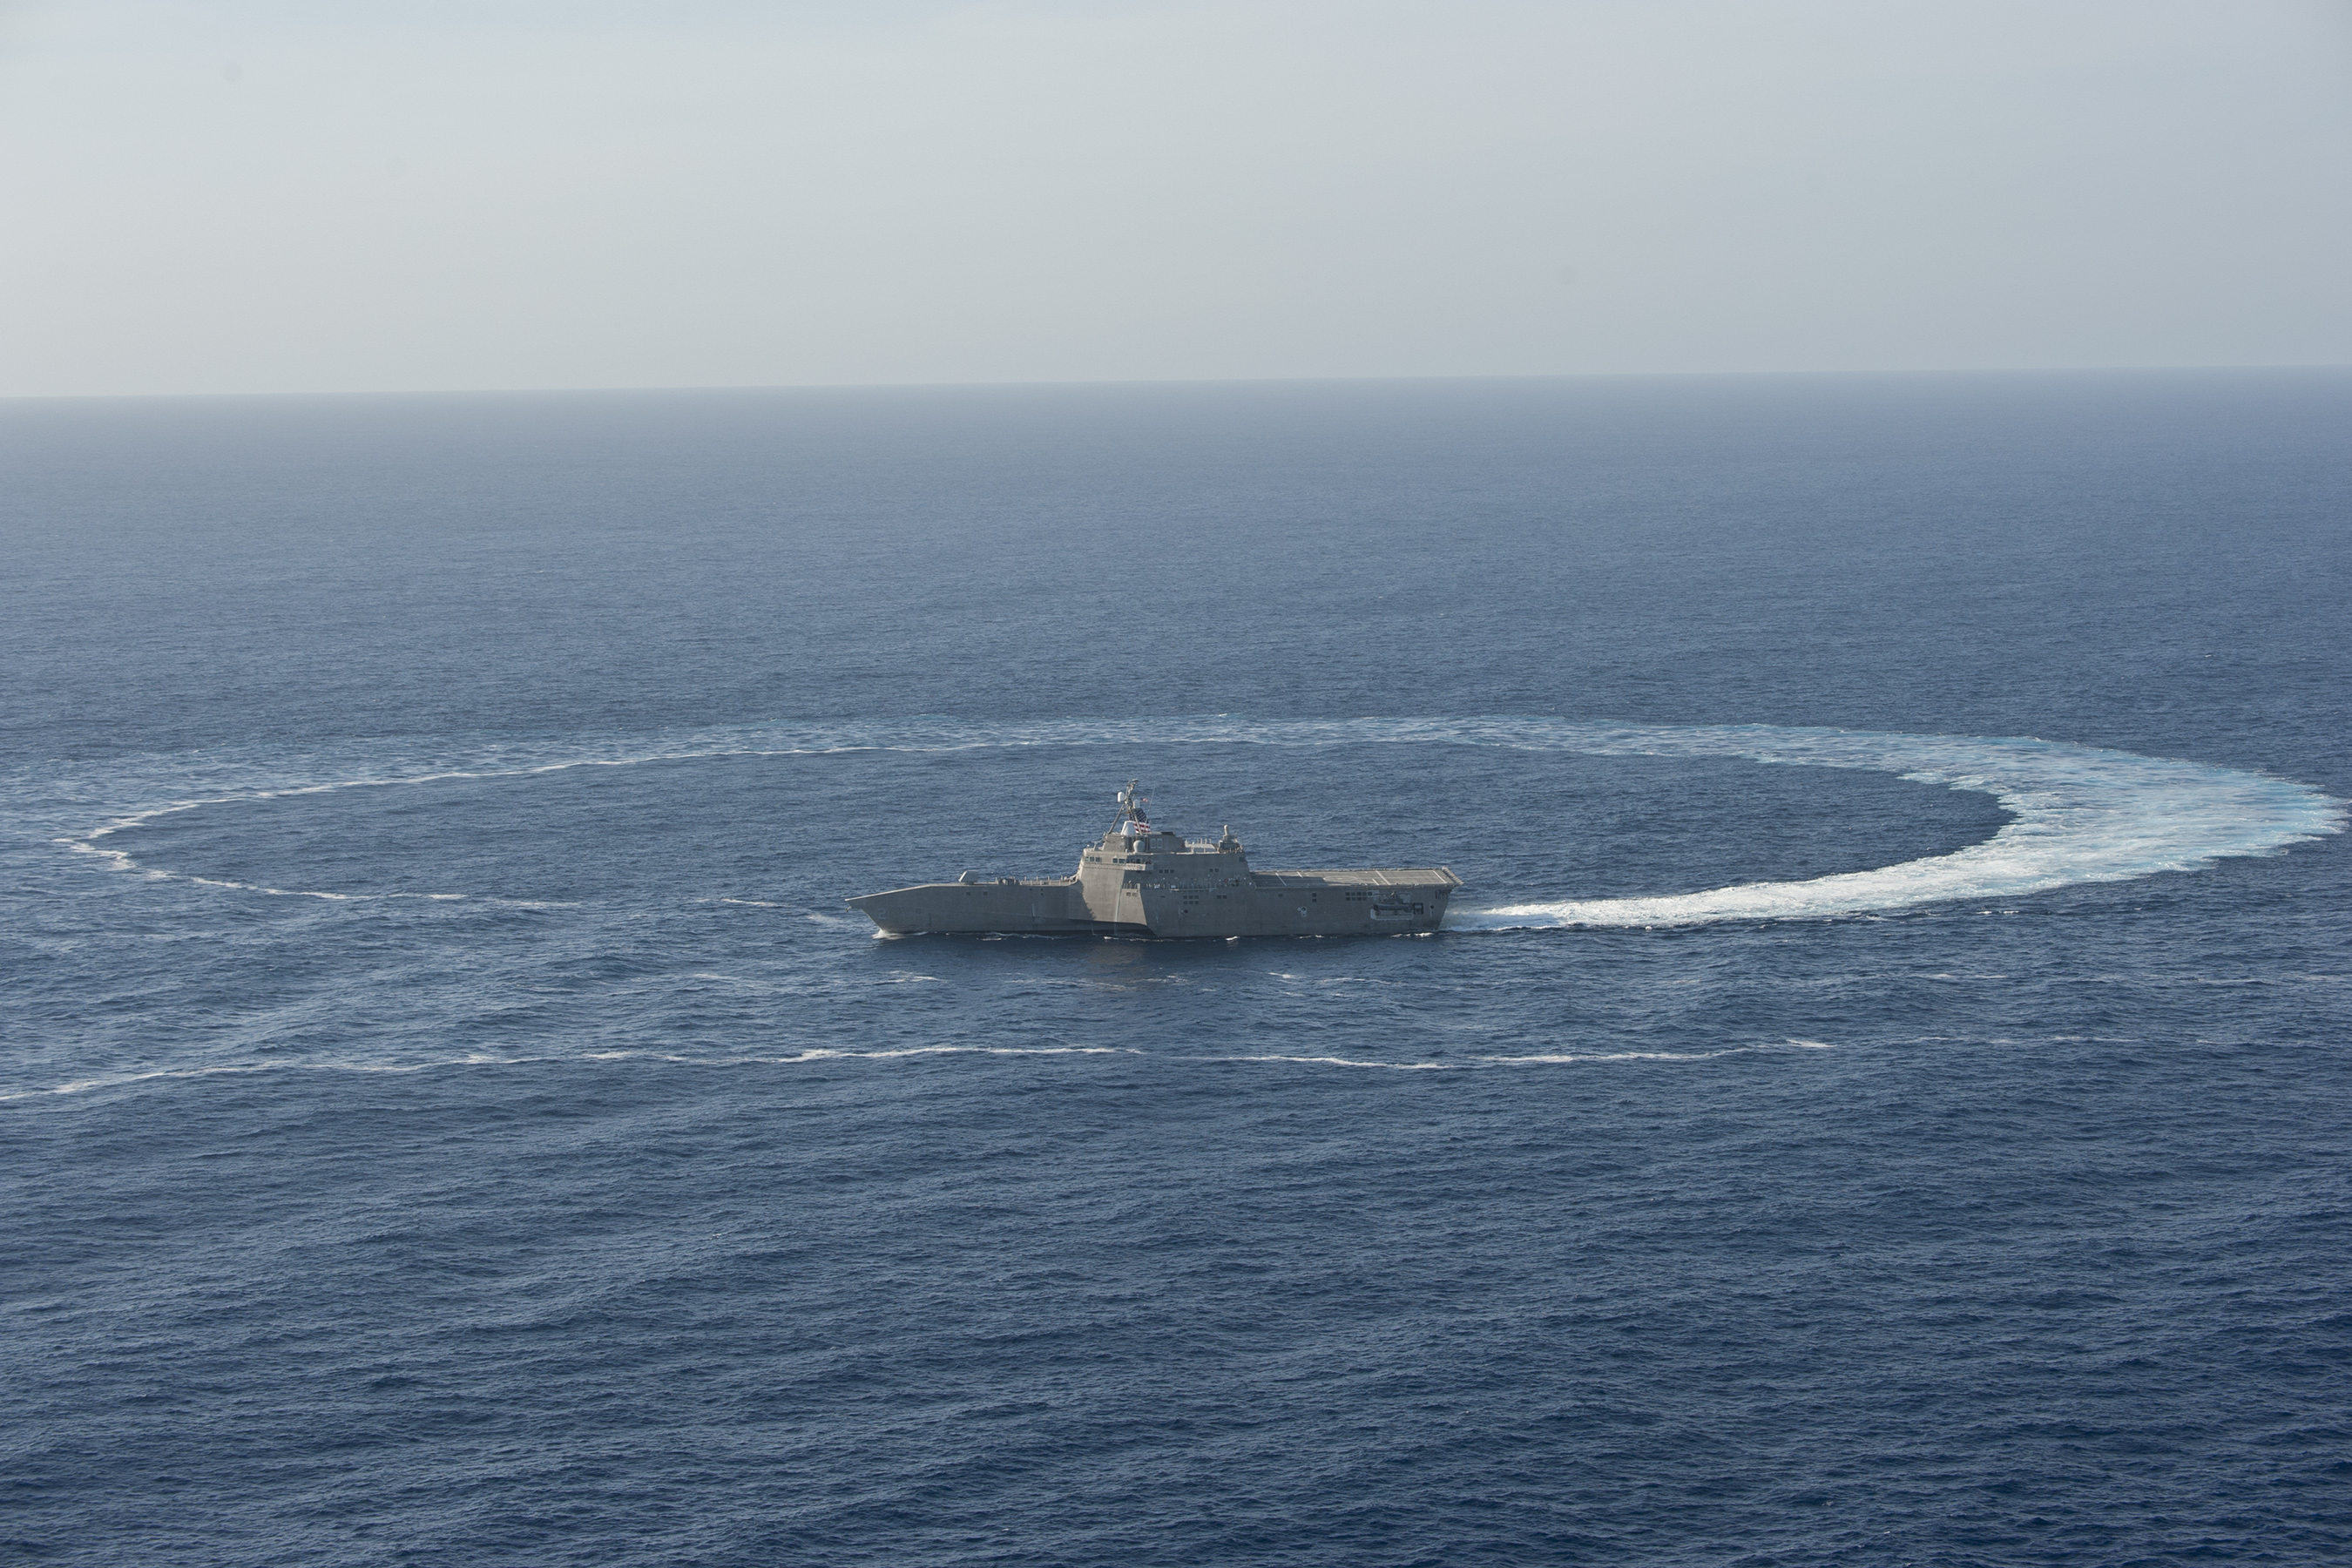 USS Independence (LCS 2) shows its maneuverability while underway in the Pacific Ocean on April 23, 2014. US Navy Photo